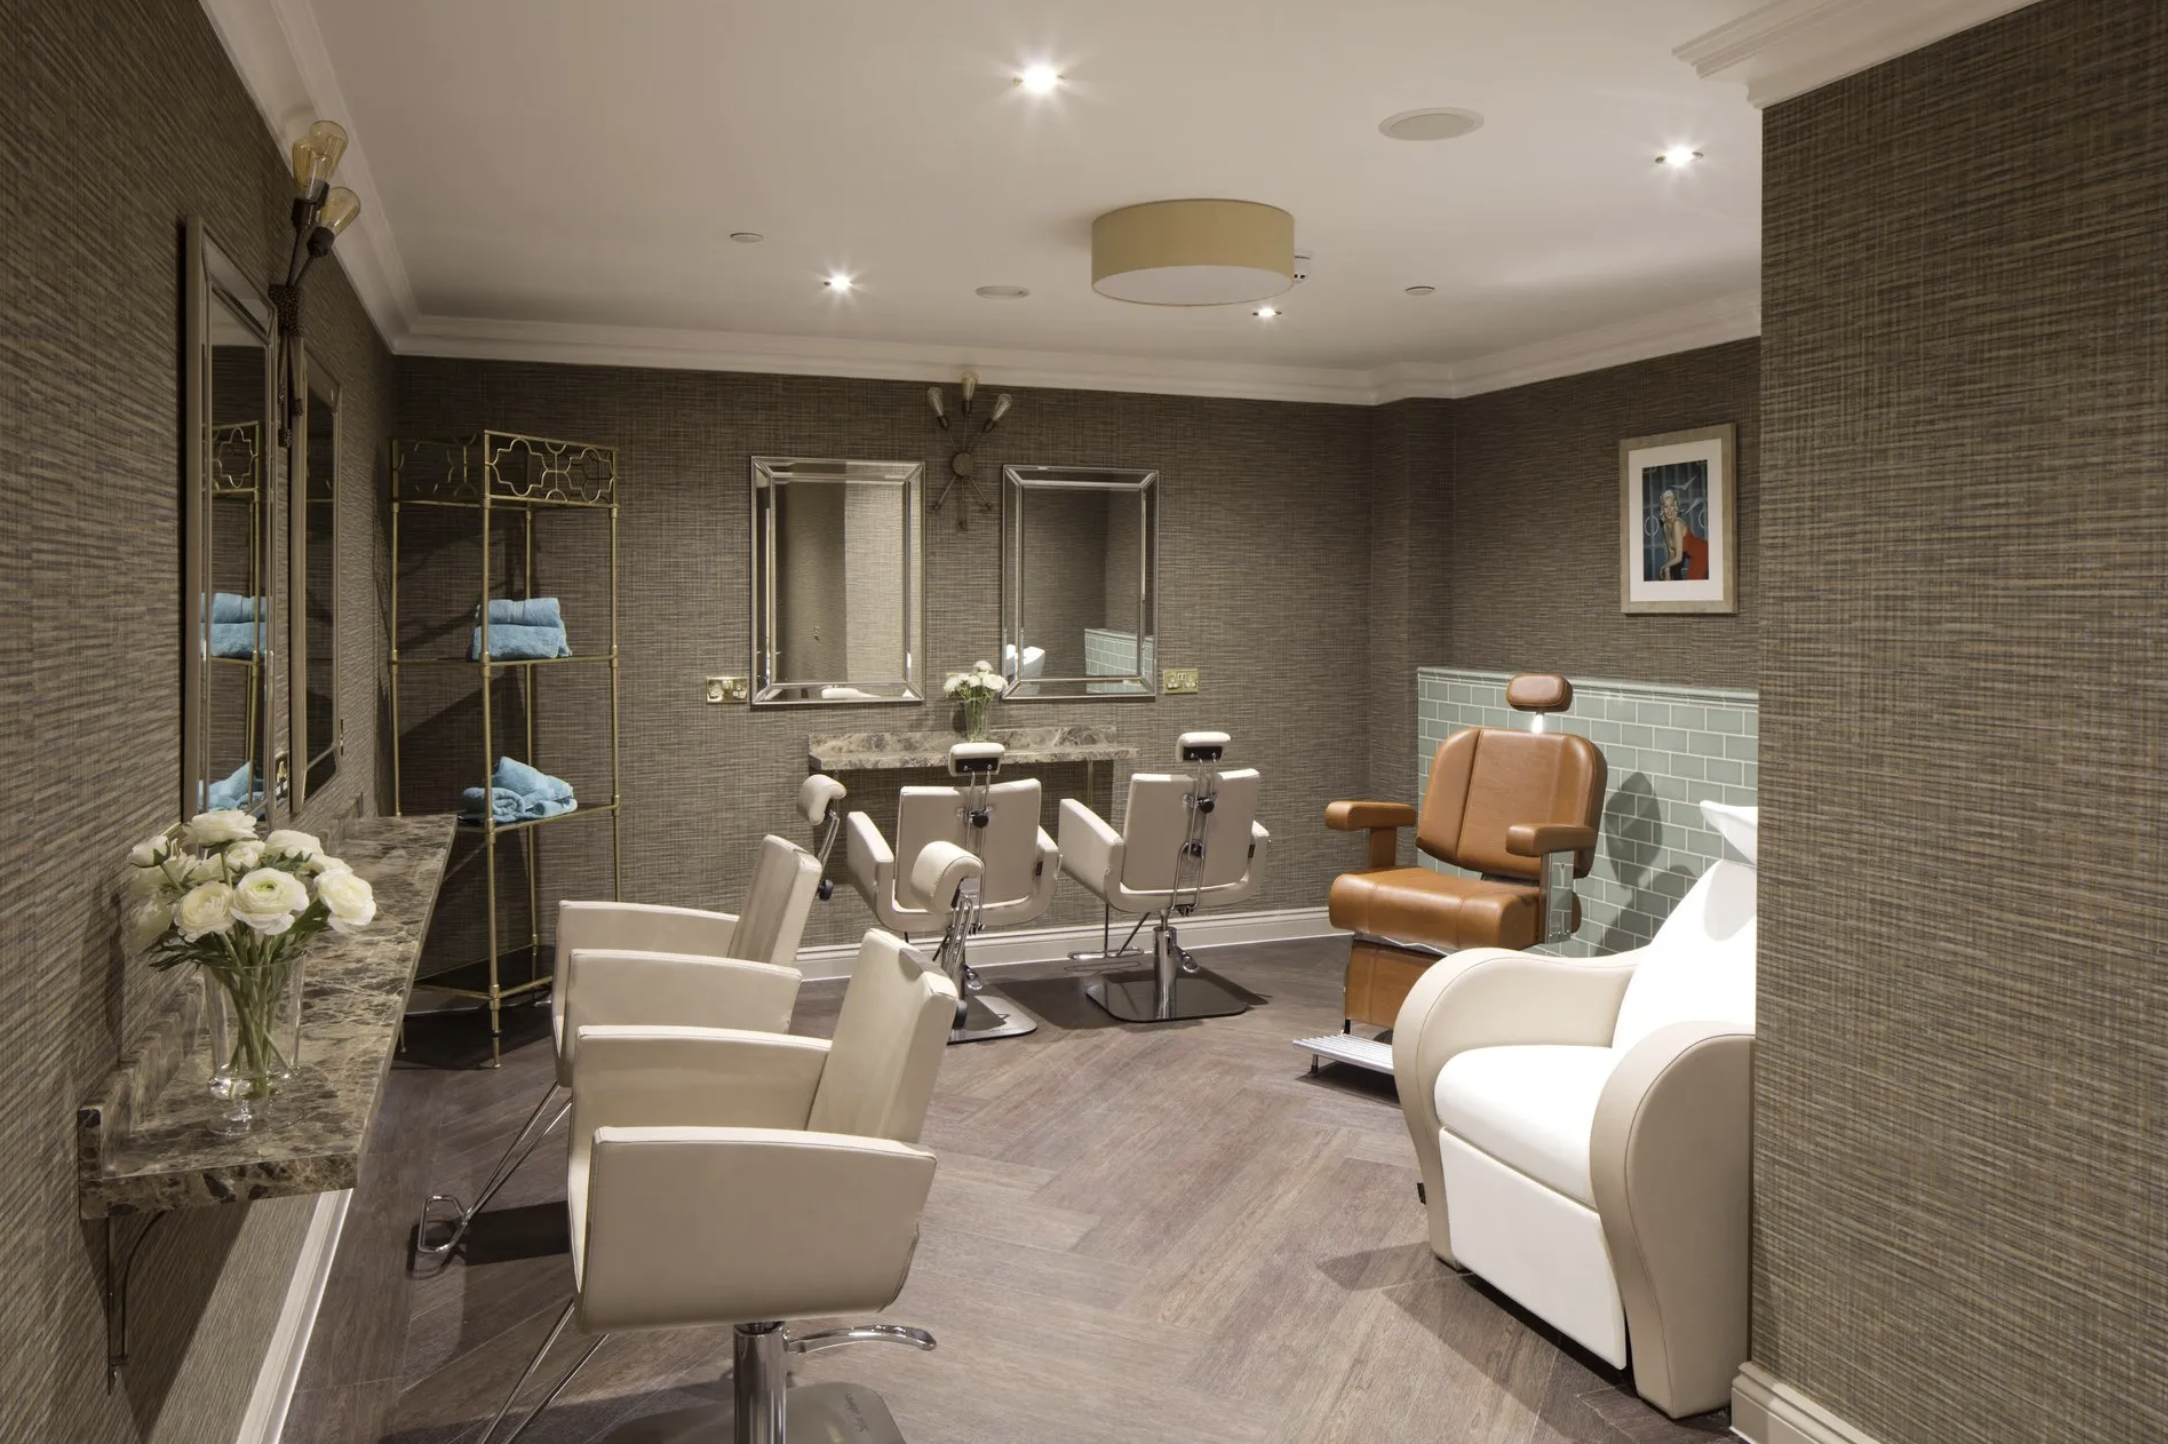 Salon of St Johns House care home in Norwich, Norfolk